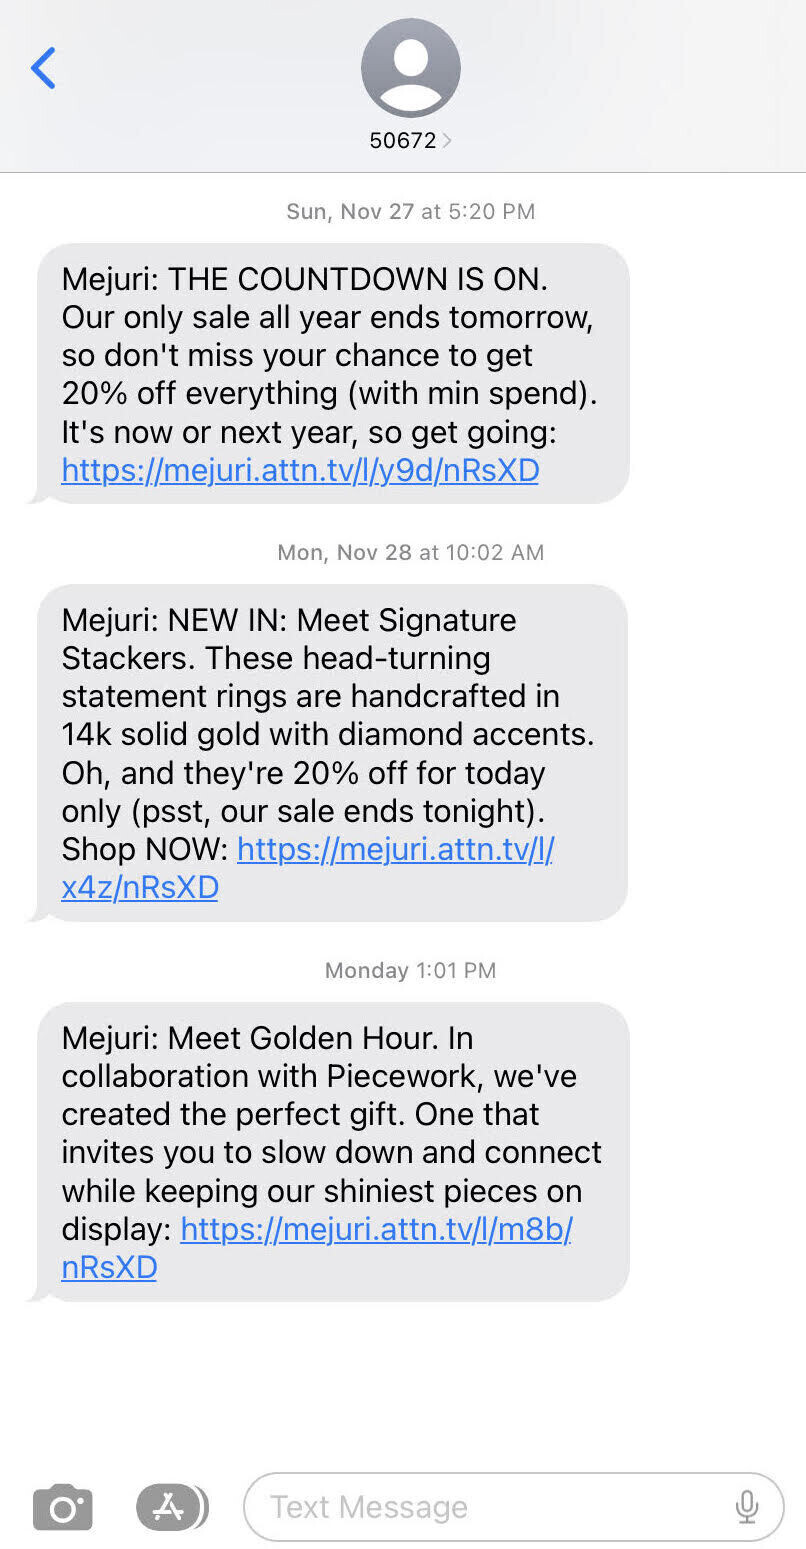 sms marketing from Mejuri